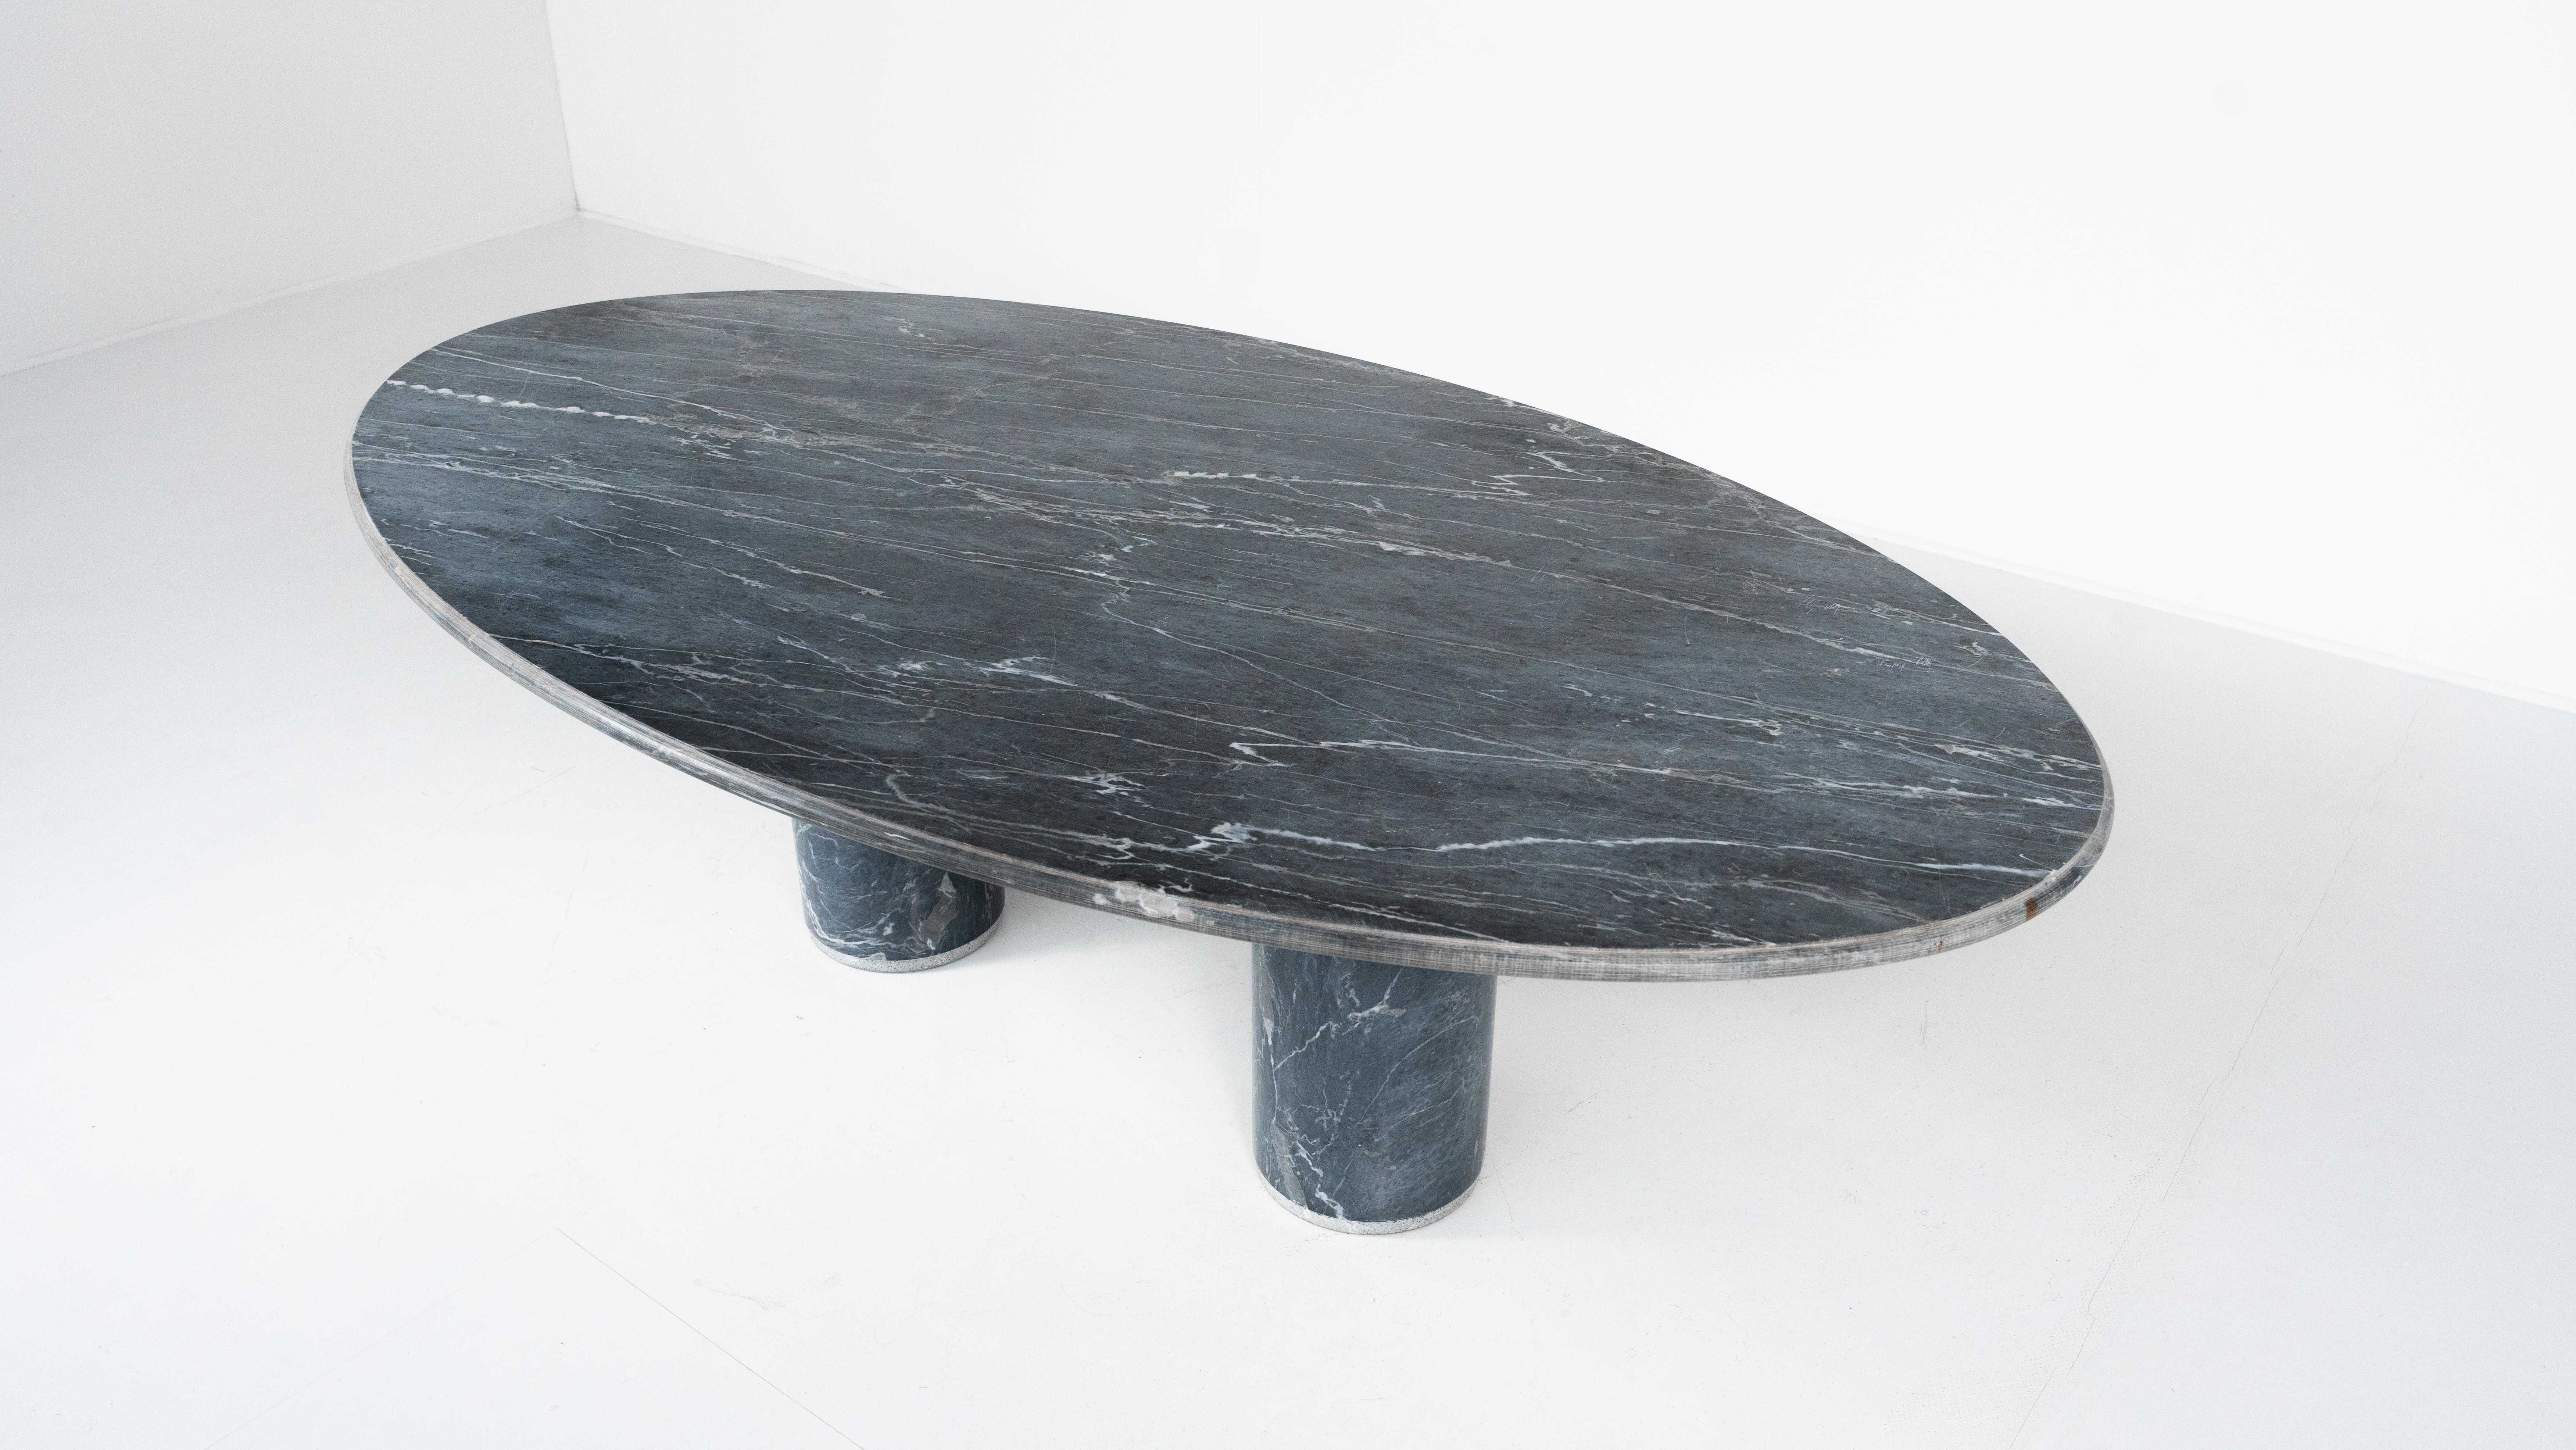 Late 20th Century Ovale del Giardiniere Table by Achille Castiglioni for Upgroup, Marble, 1980s For Sale